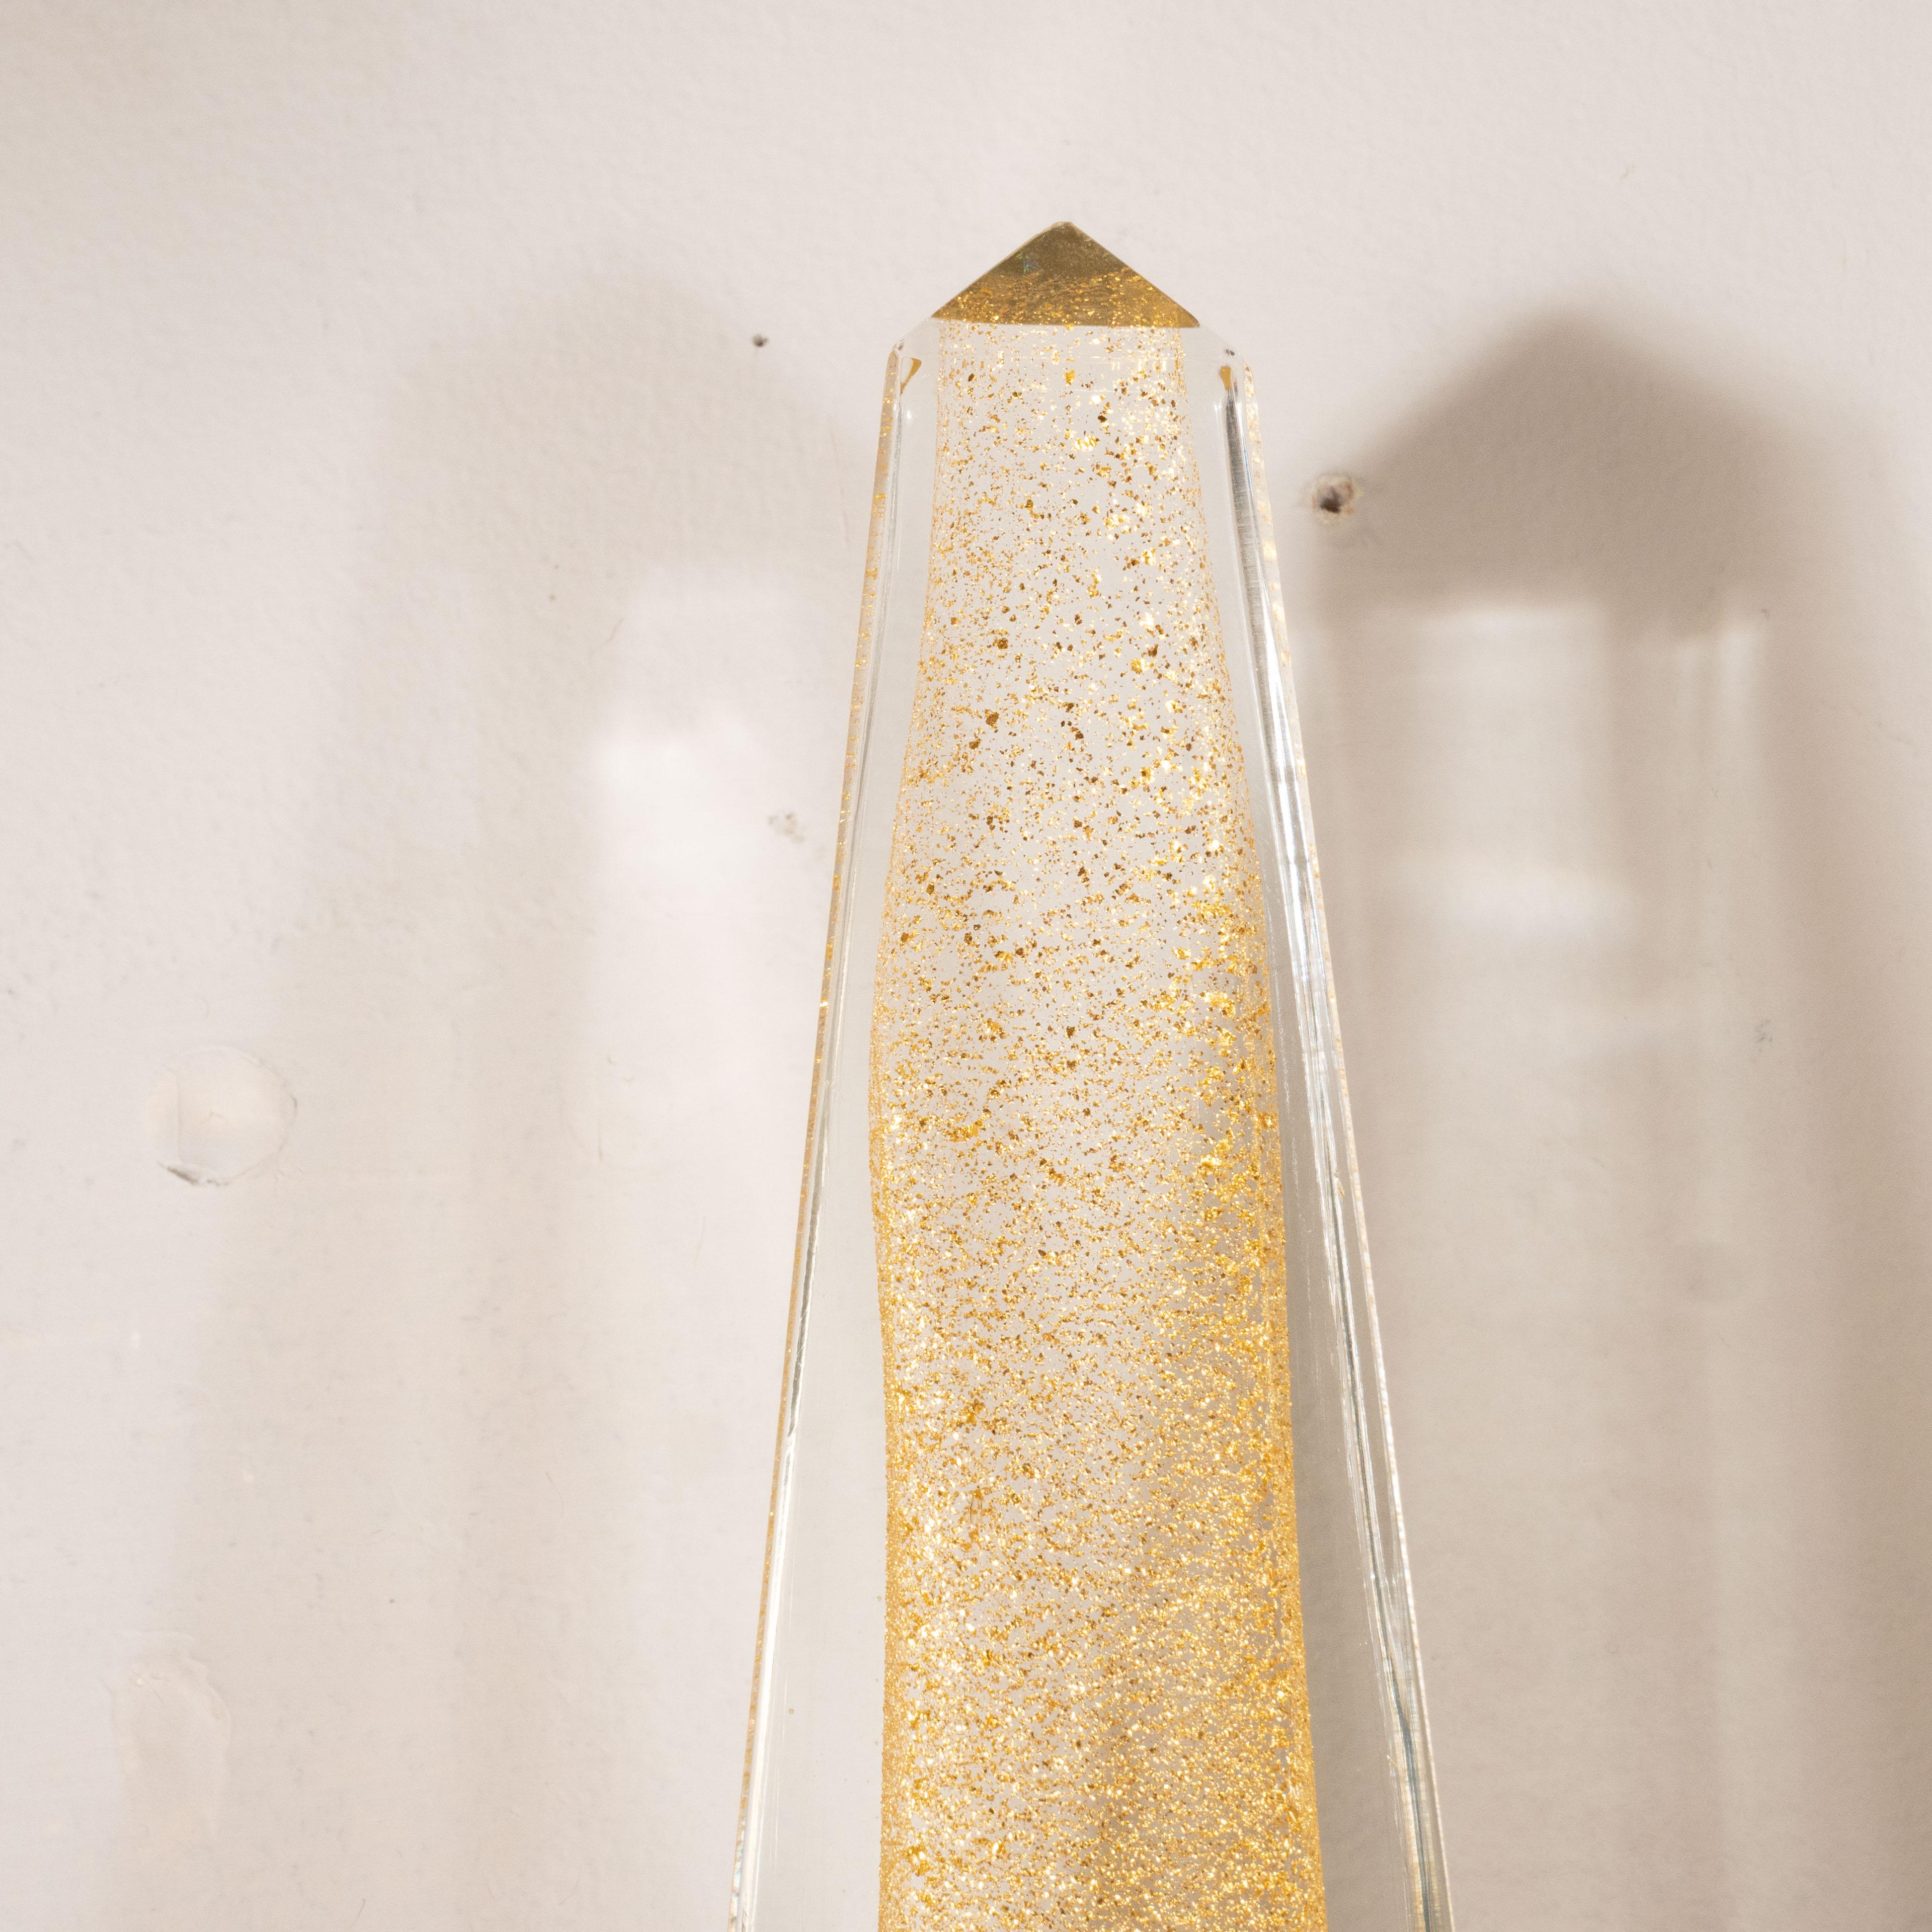 Brass Pair of Modernist Murano Obelisk Sconces in Pearlescent Glass with 24-Karat Gold